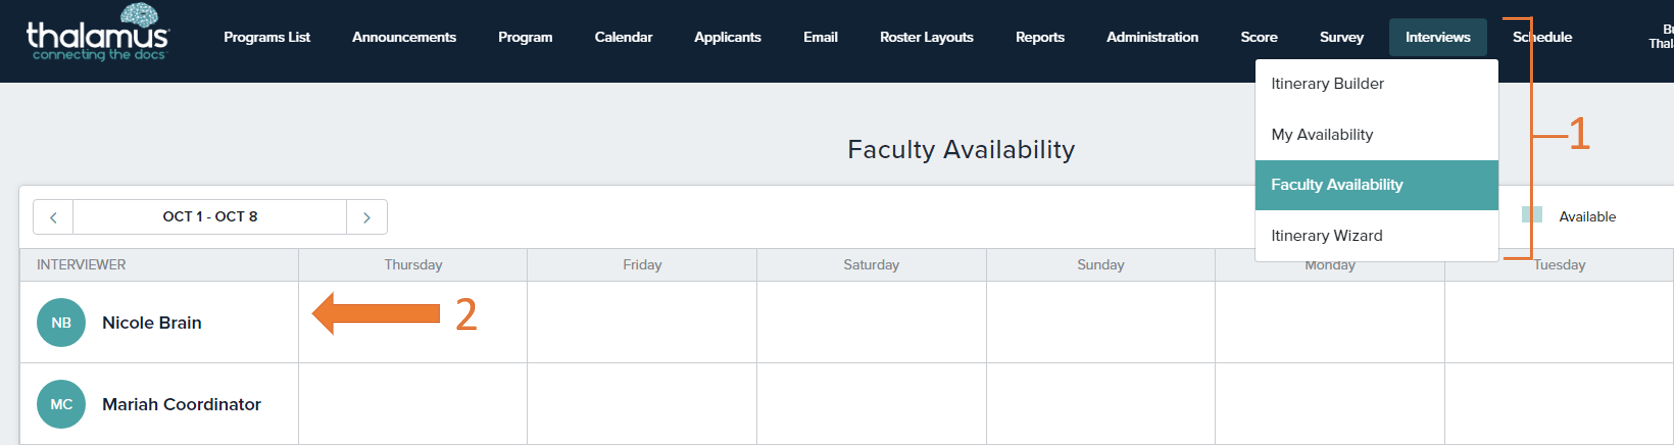 Faculty_Availability.png